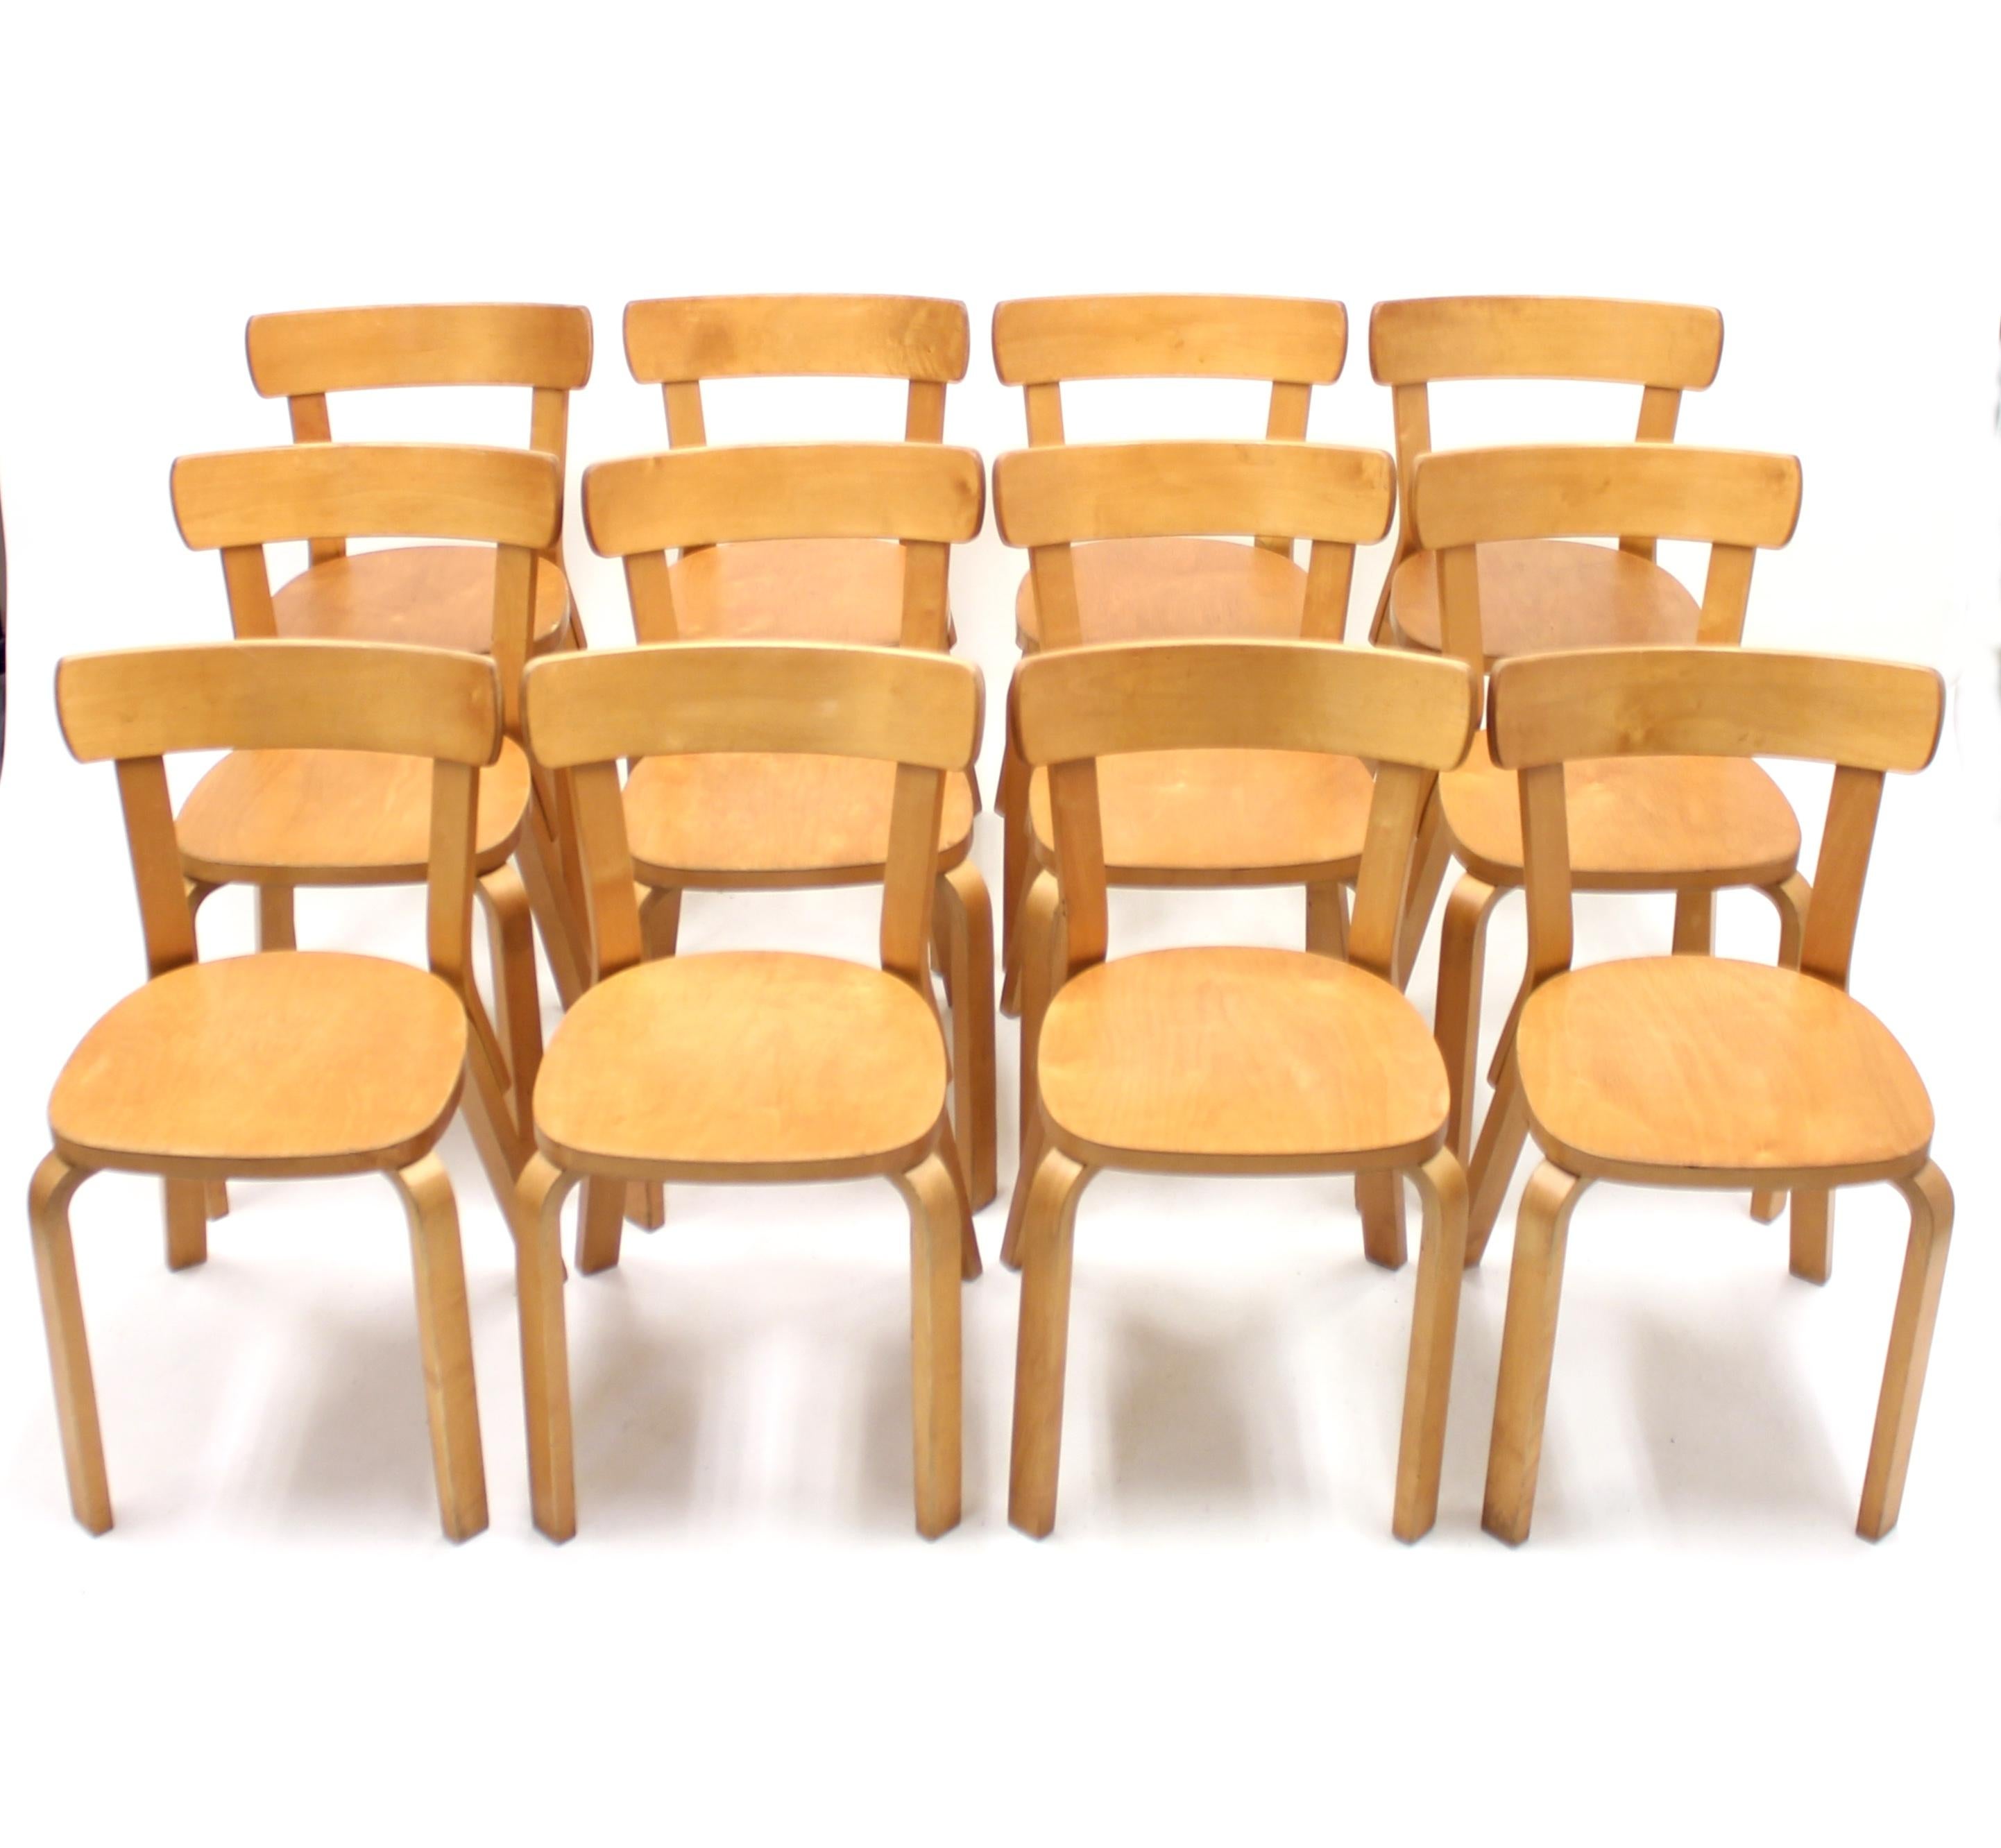 Set of 12 chairs, model 69, designed by Alvar Aalto for Artek in 1935. This set was produced by the Artek factory in Hedemora, Sweden circa 1950. Frame of steam bent birch. The Hedemora factory took over all production for Artek between 1946-1956